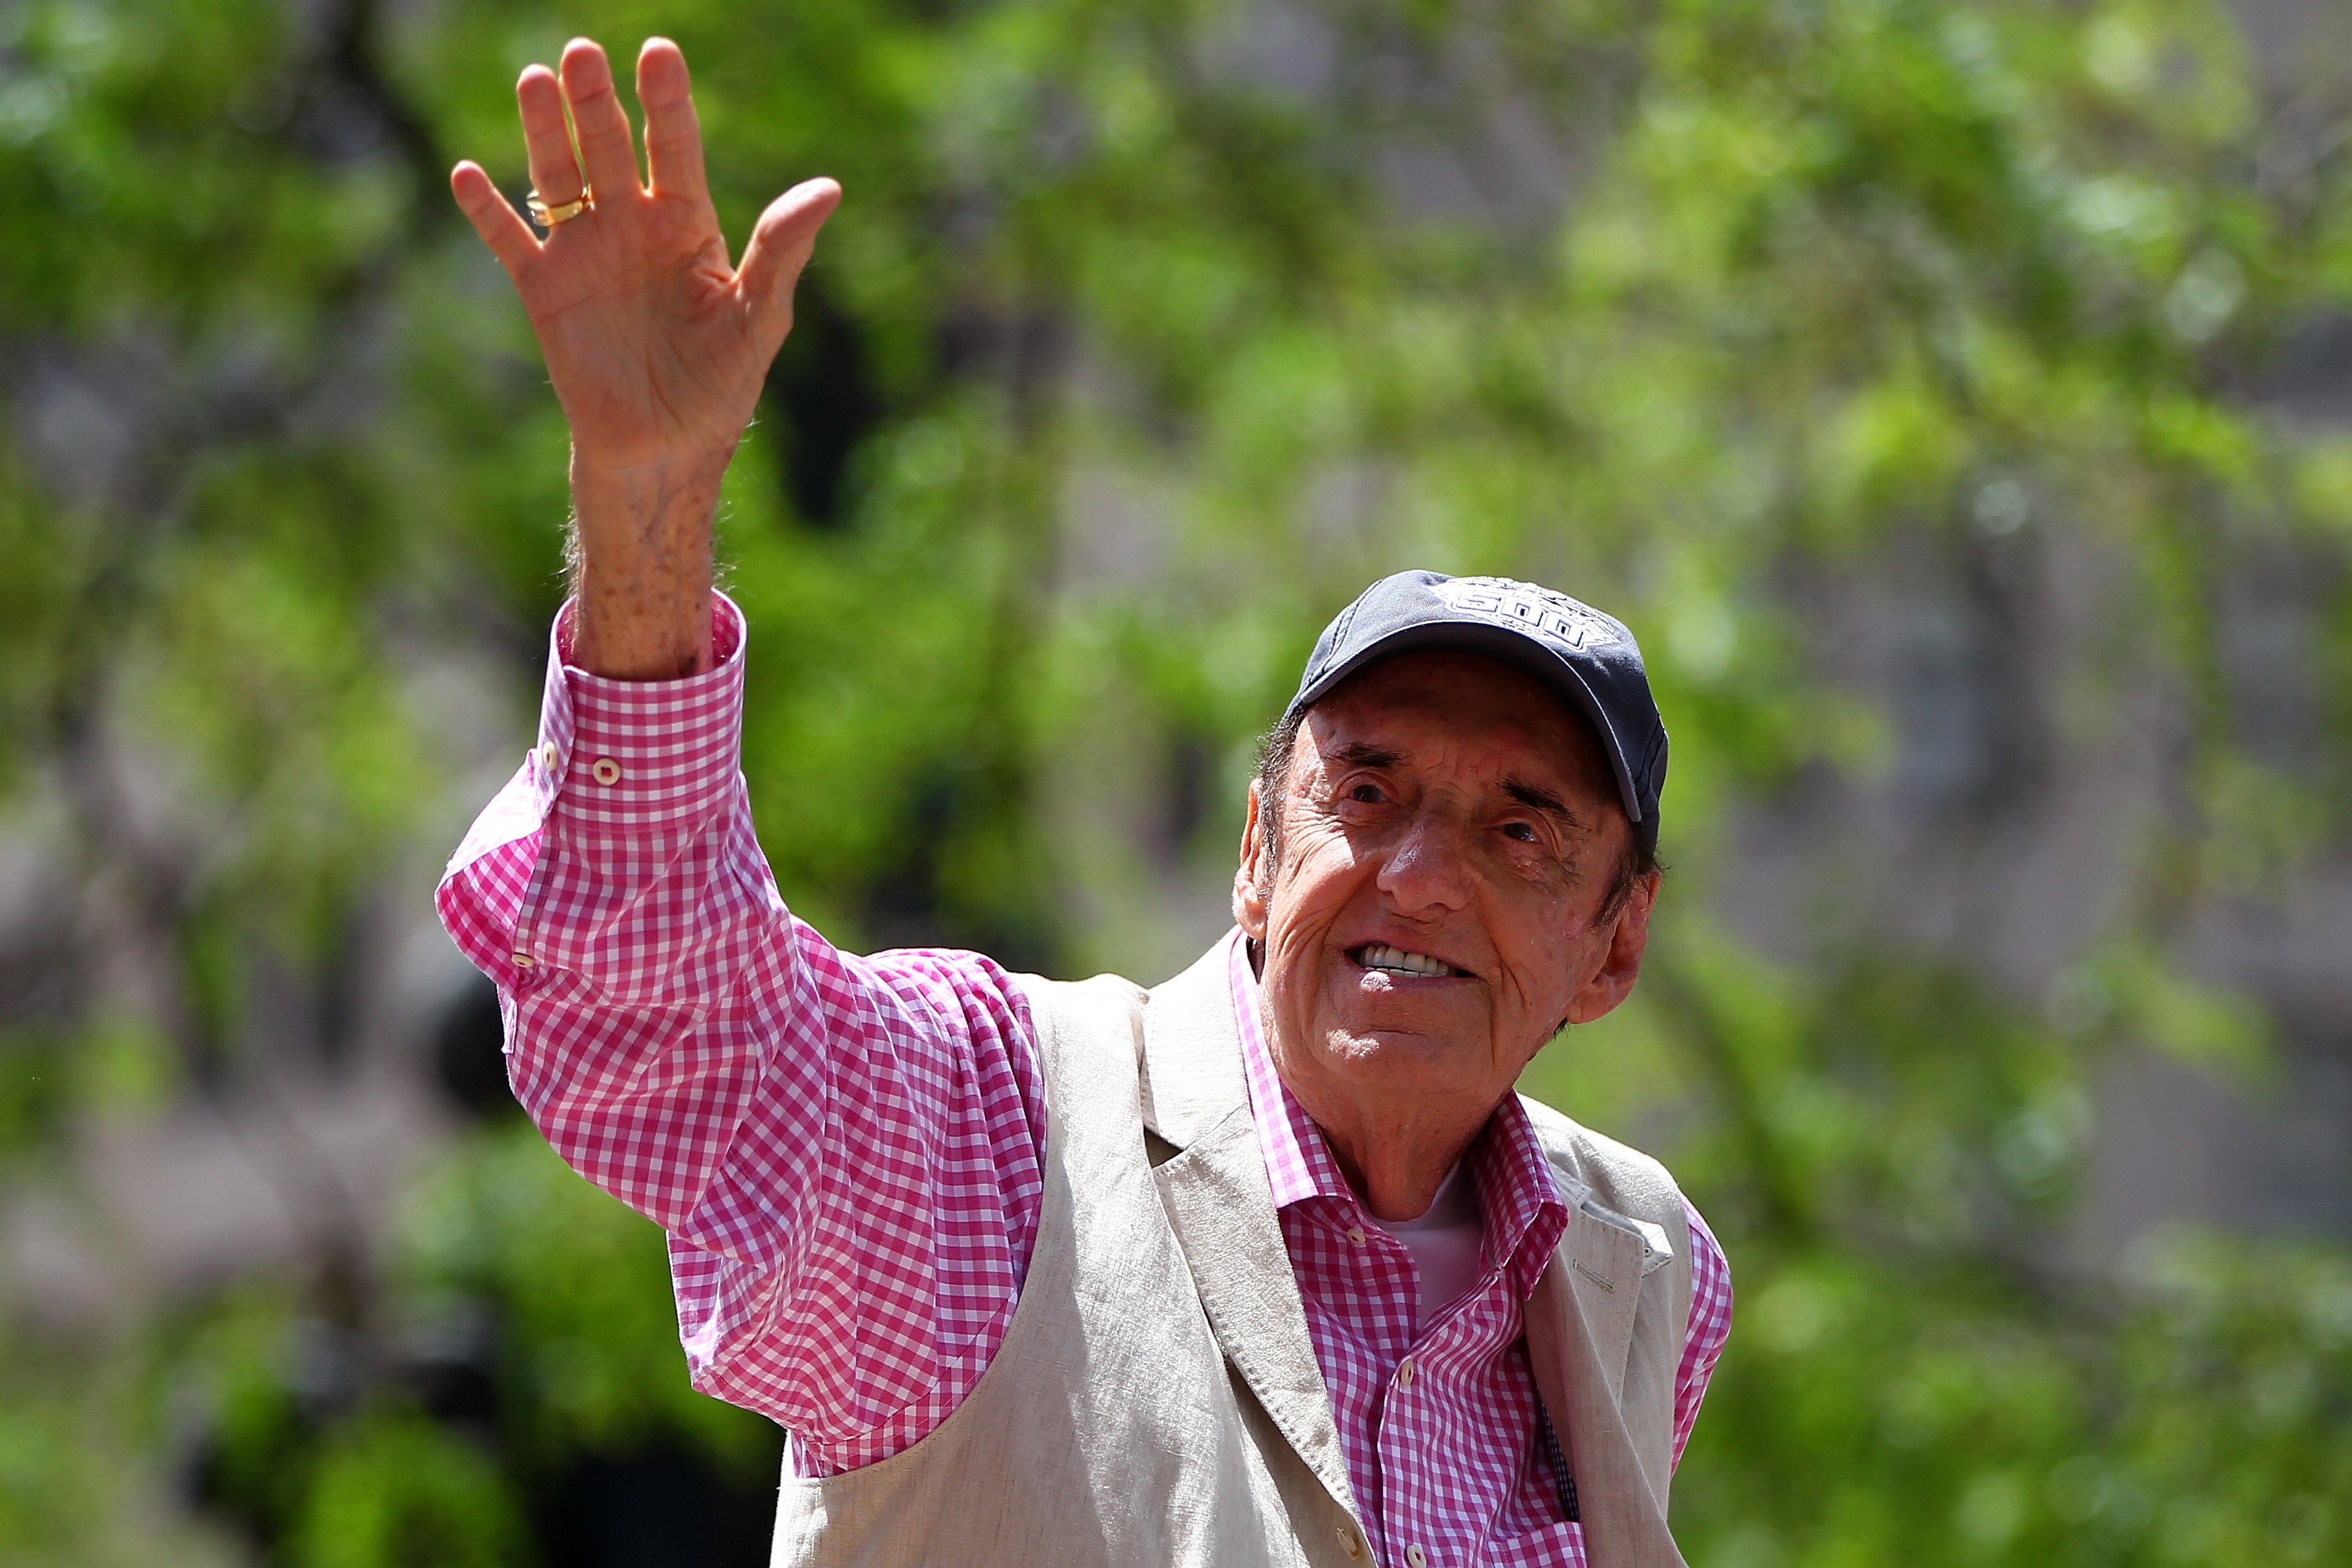 Jim Nabors waves to the crowd during the Indianapolis 500 parade on May 24, 2014 | Photo: Getty Images